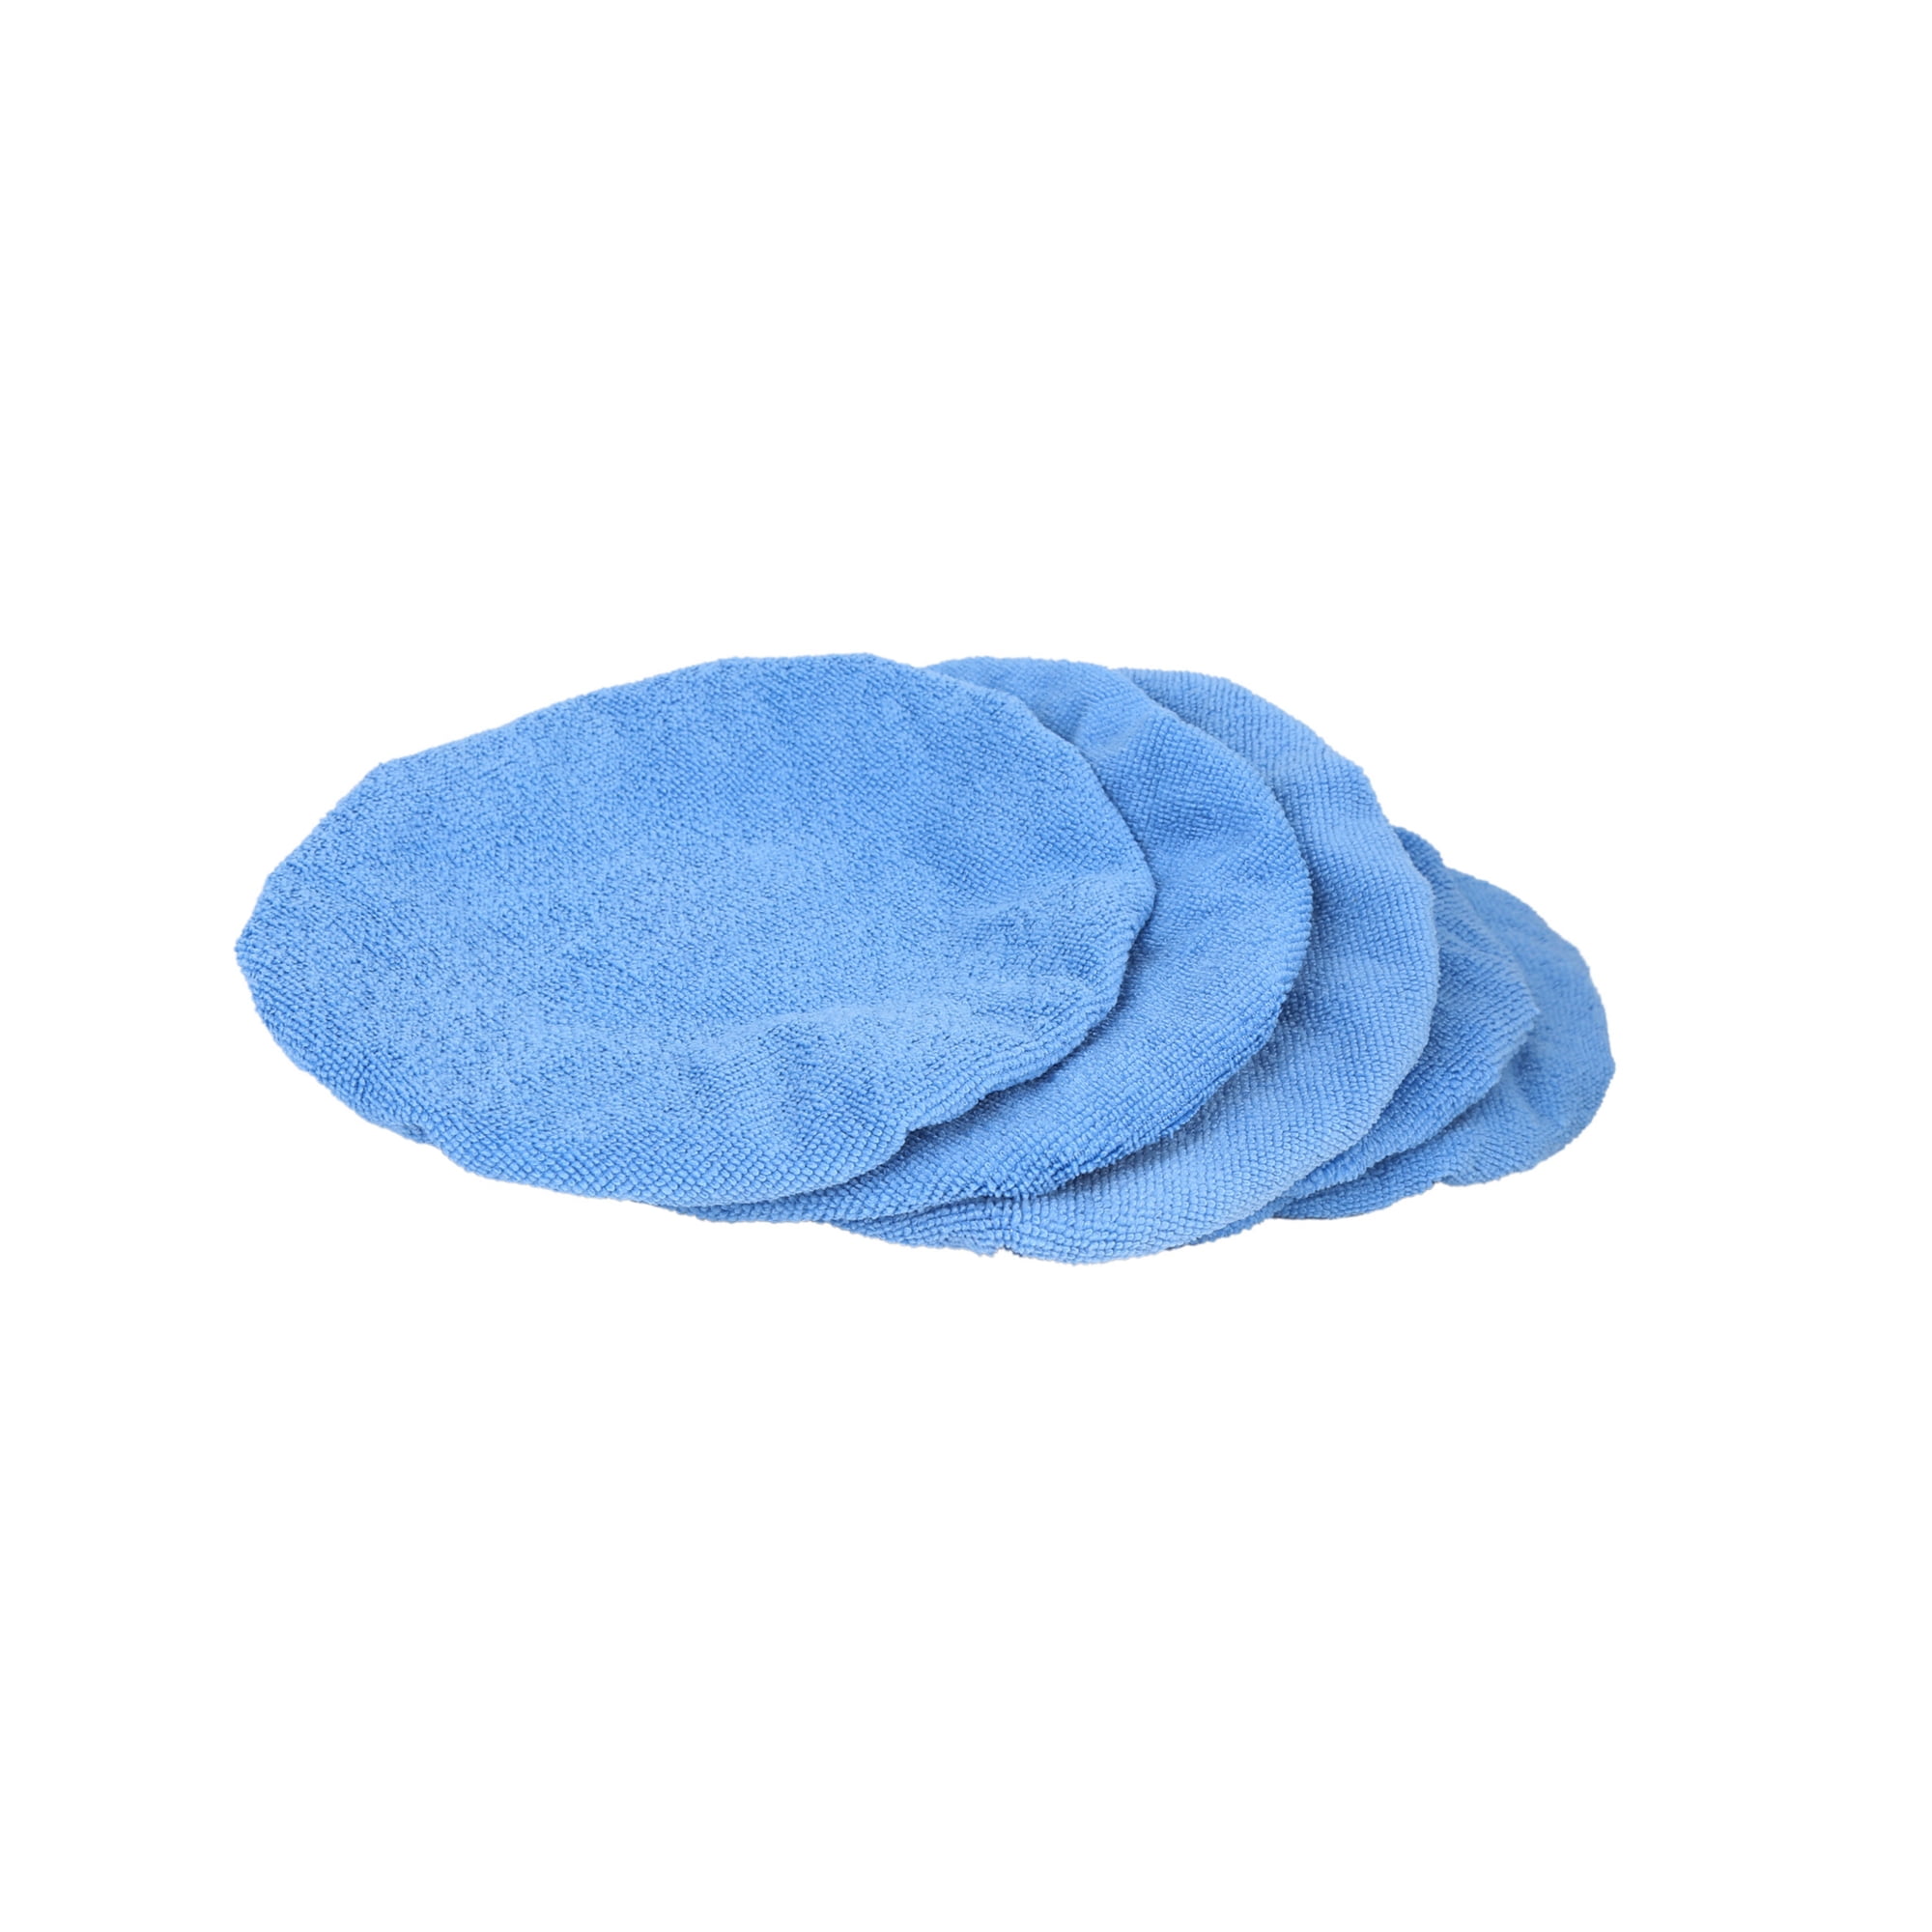 12 Pack of Blue Microfiber Wax Applicator Pads - Perfect for a Shiny Finish!